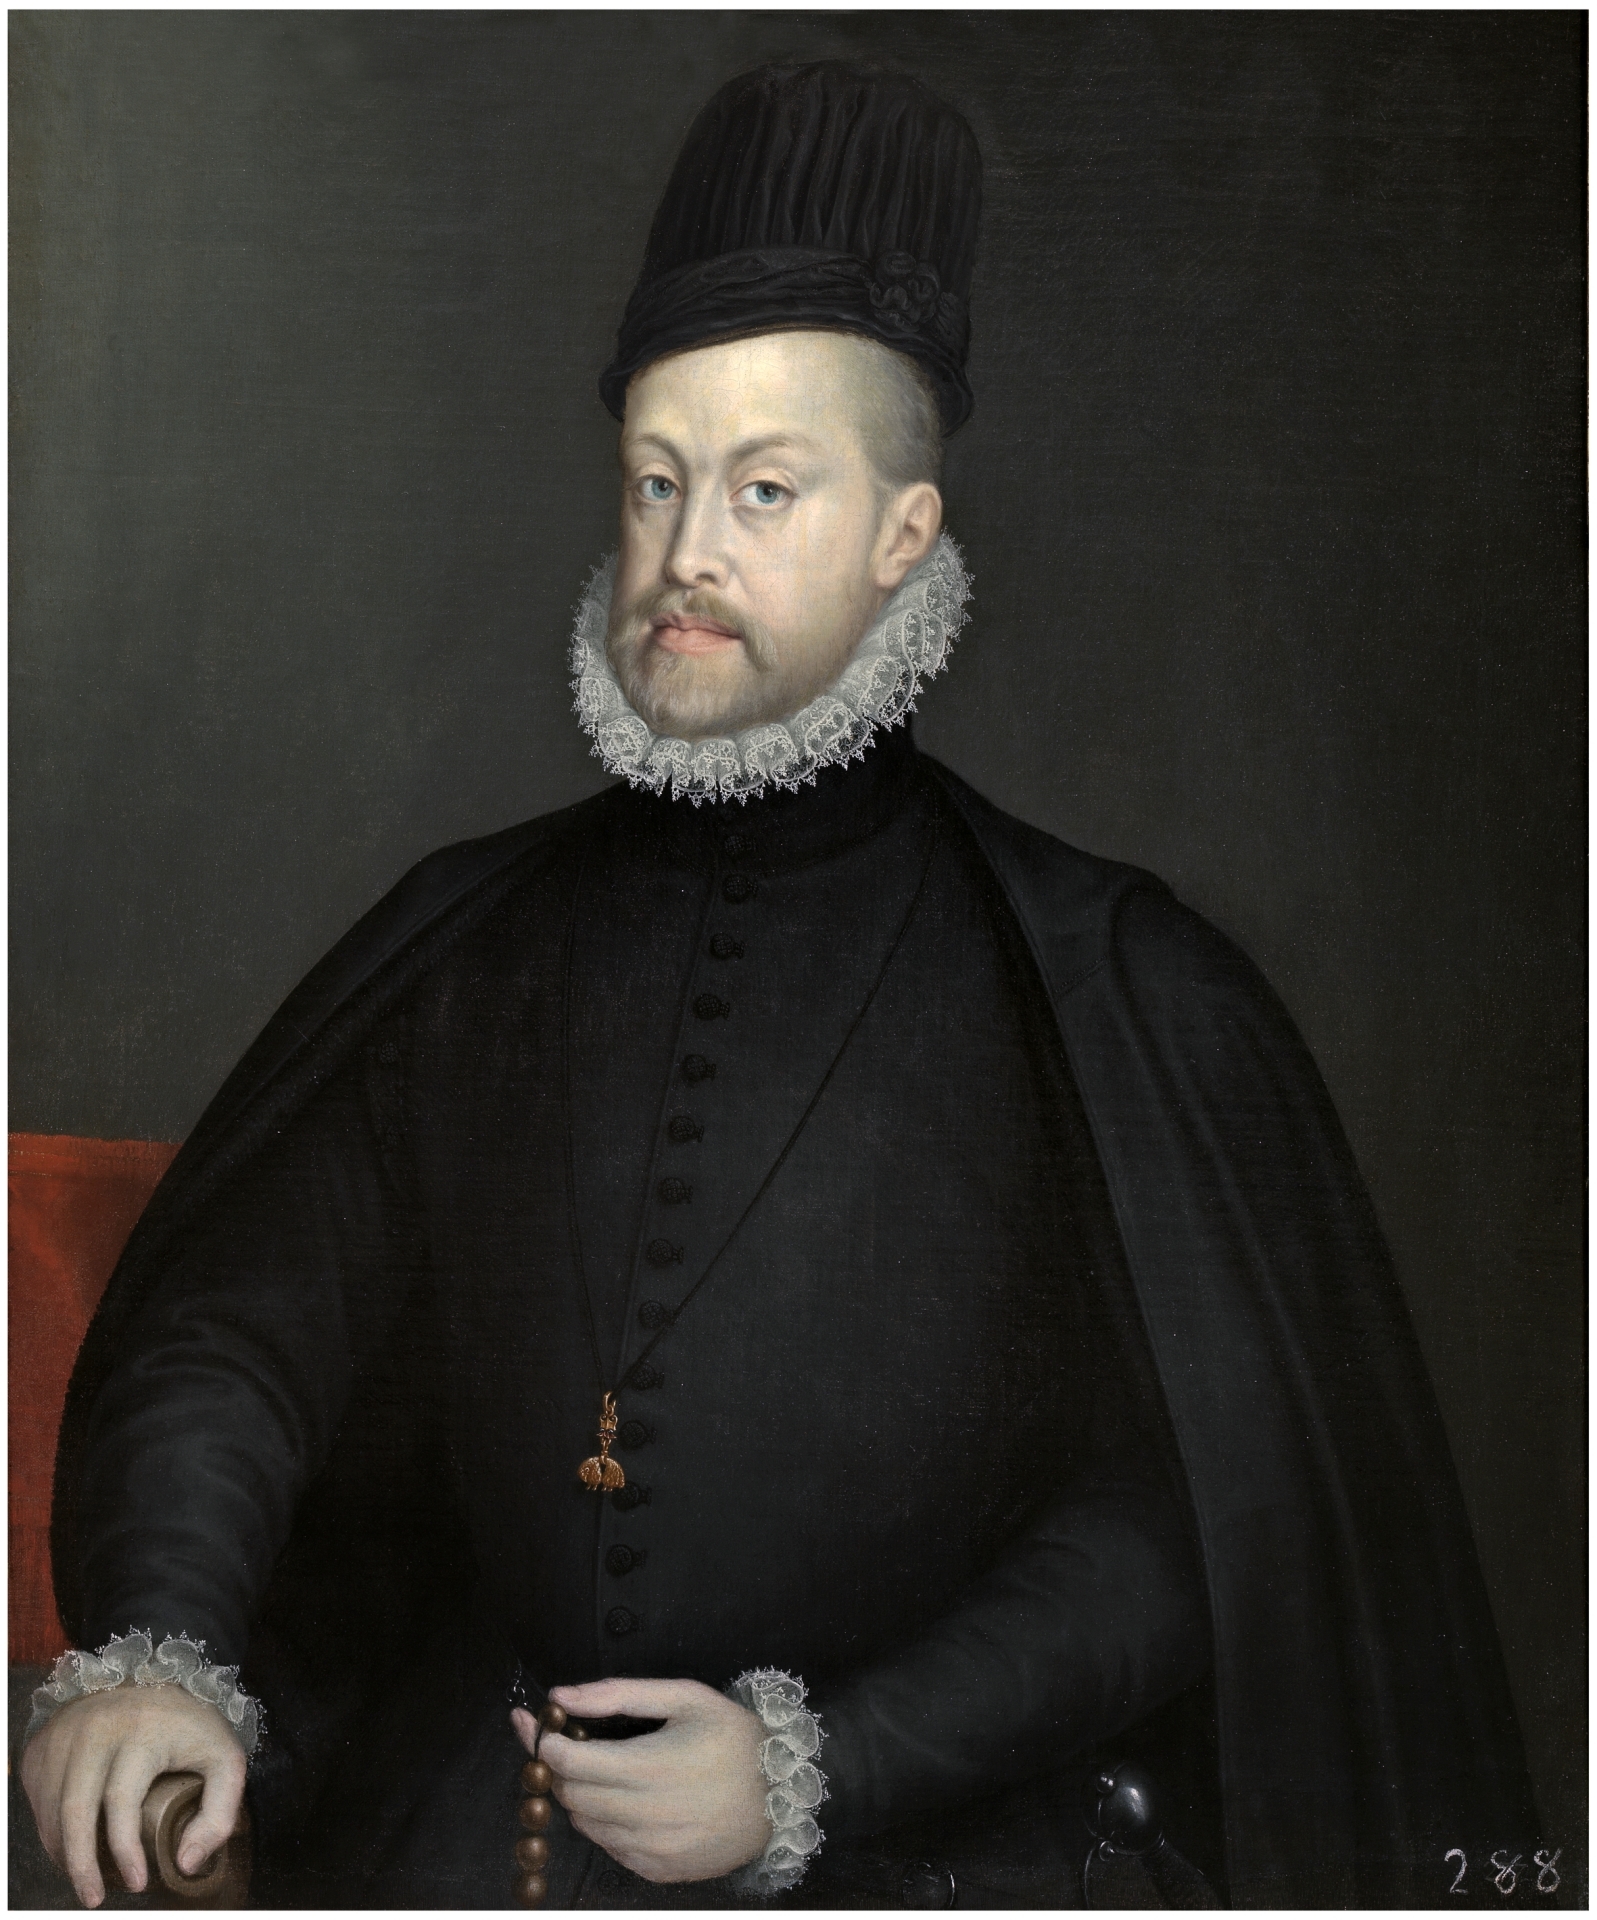 A half-length portrait of a man in a black outfit with white lace at his collar and his sleeves. He is seated on a chair with red behind him. He is wearing a tall, black hat. He holds a rosary in his left hand and looks directly at the viewer.